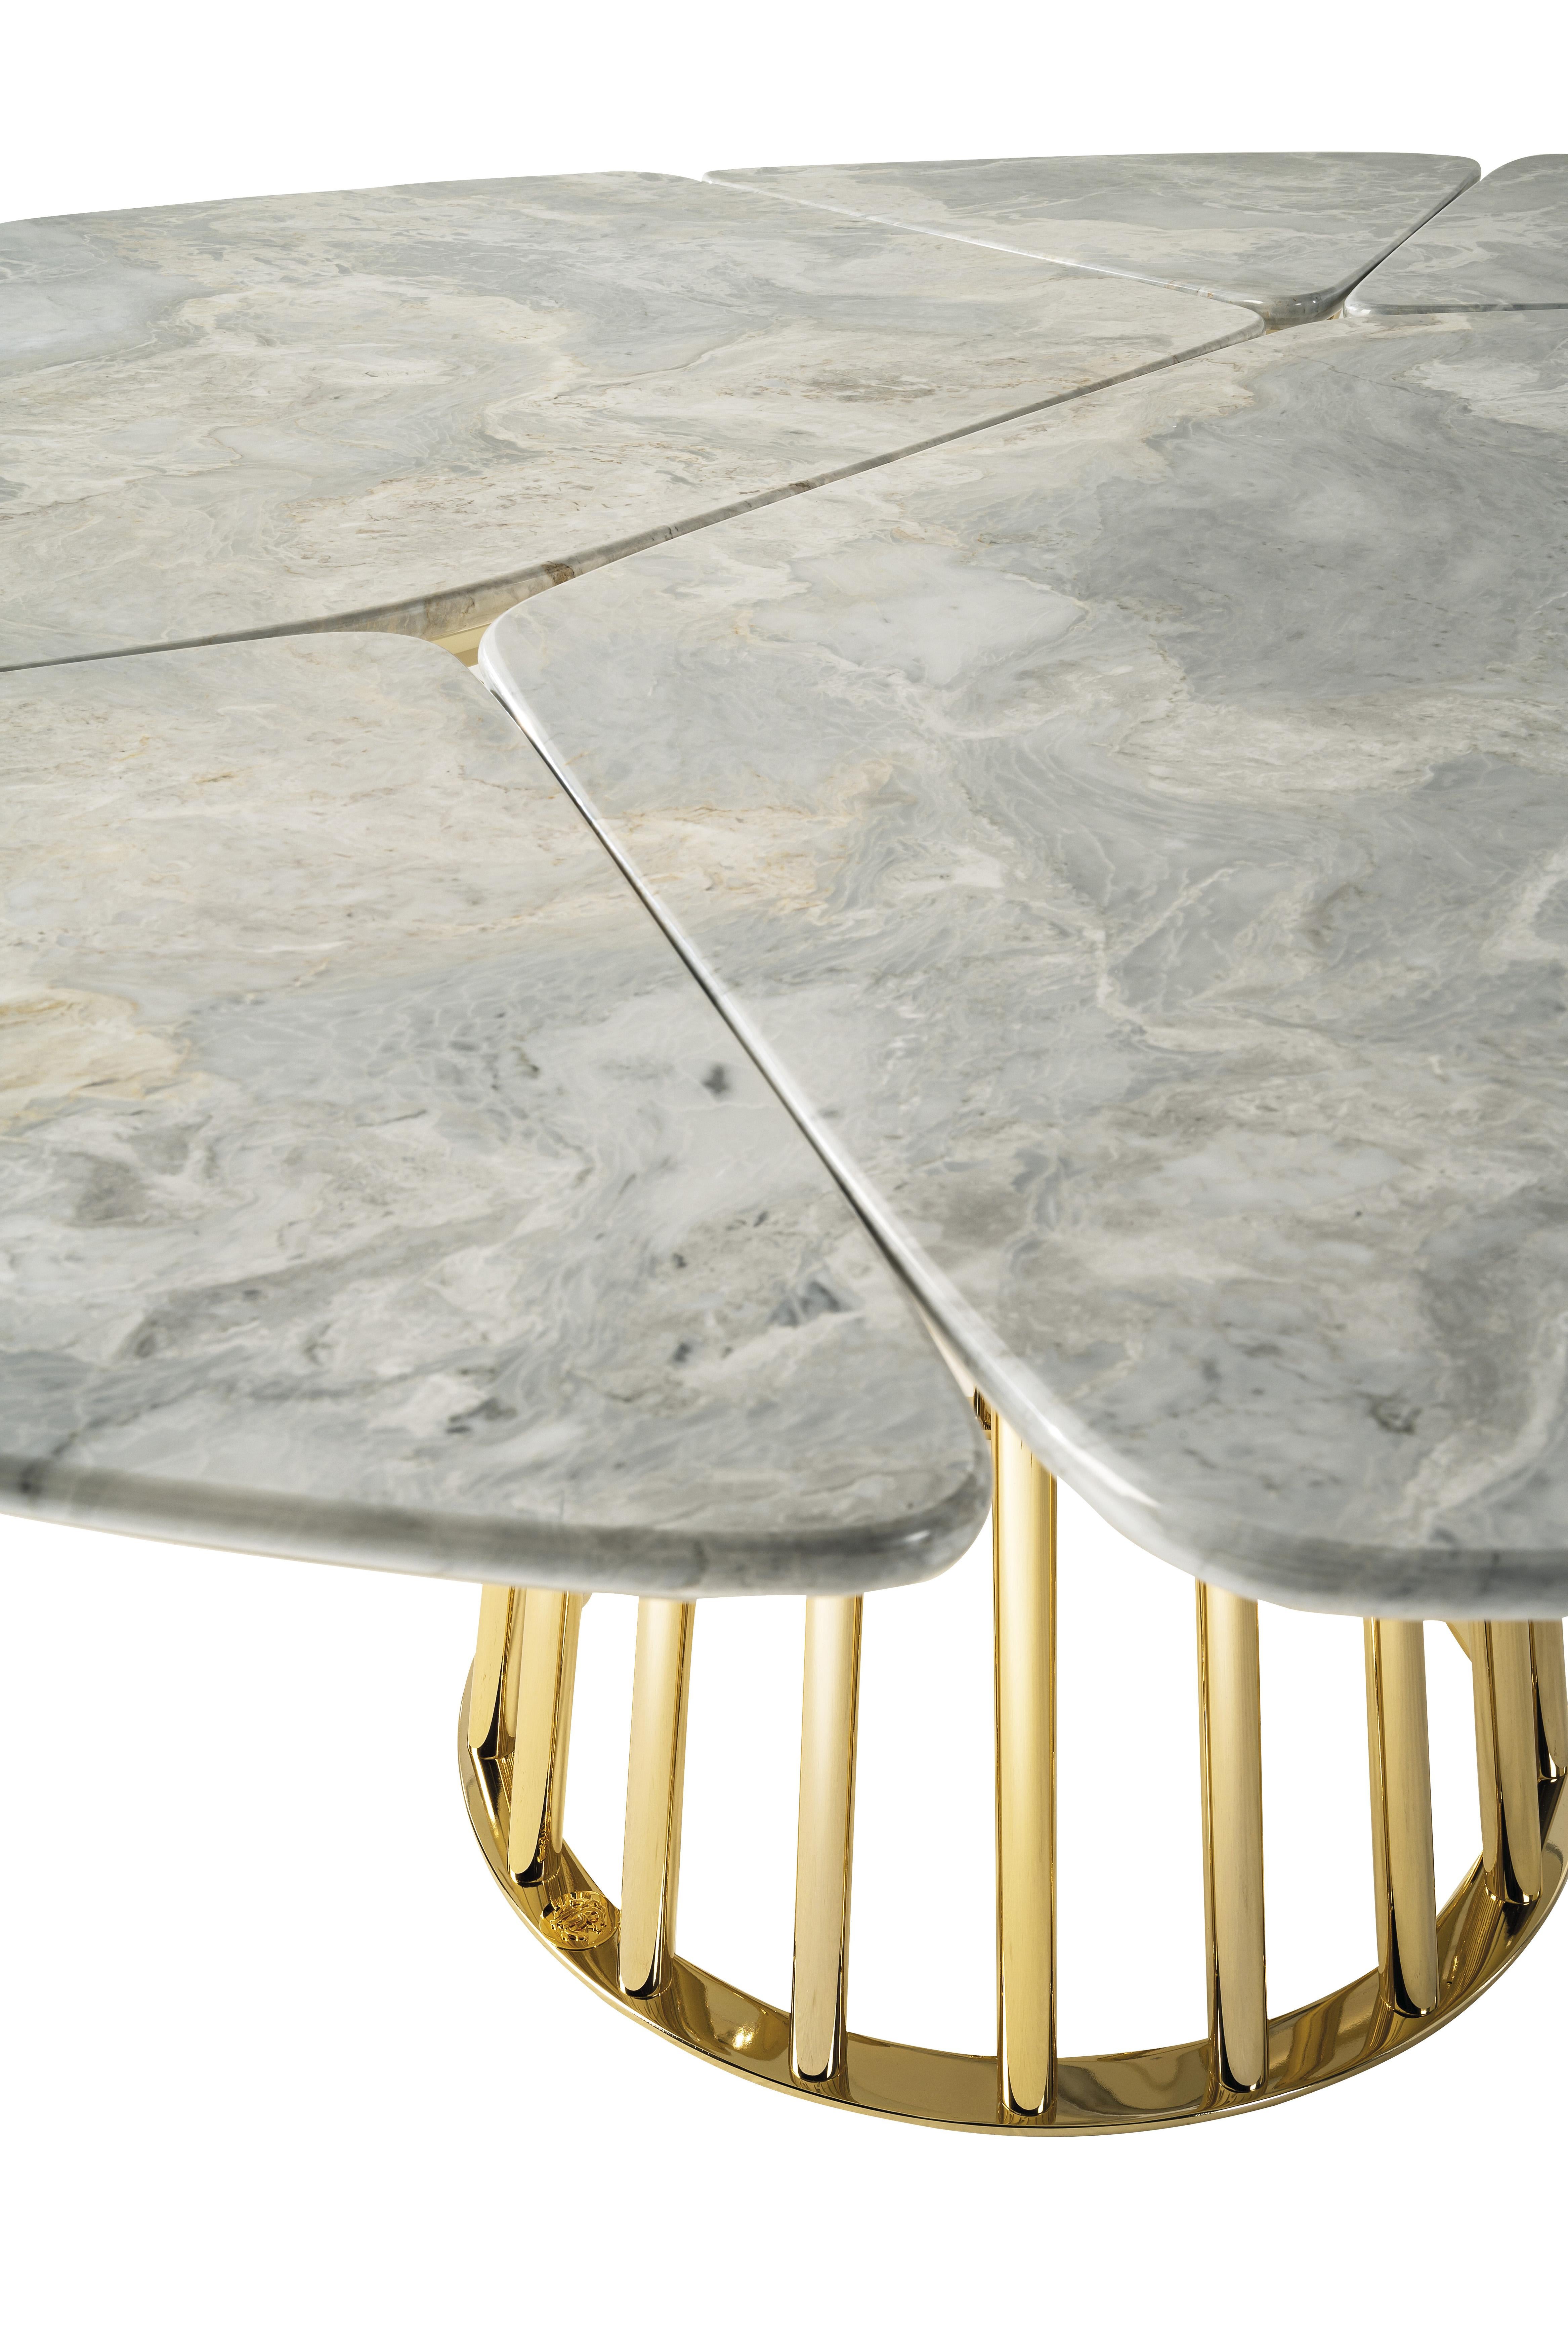 Italian 21st Century Baobab Table with Marble Top by Roberto Cavalli Home Interiors For Sale